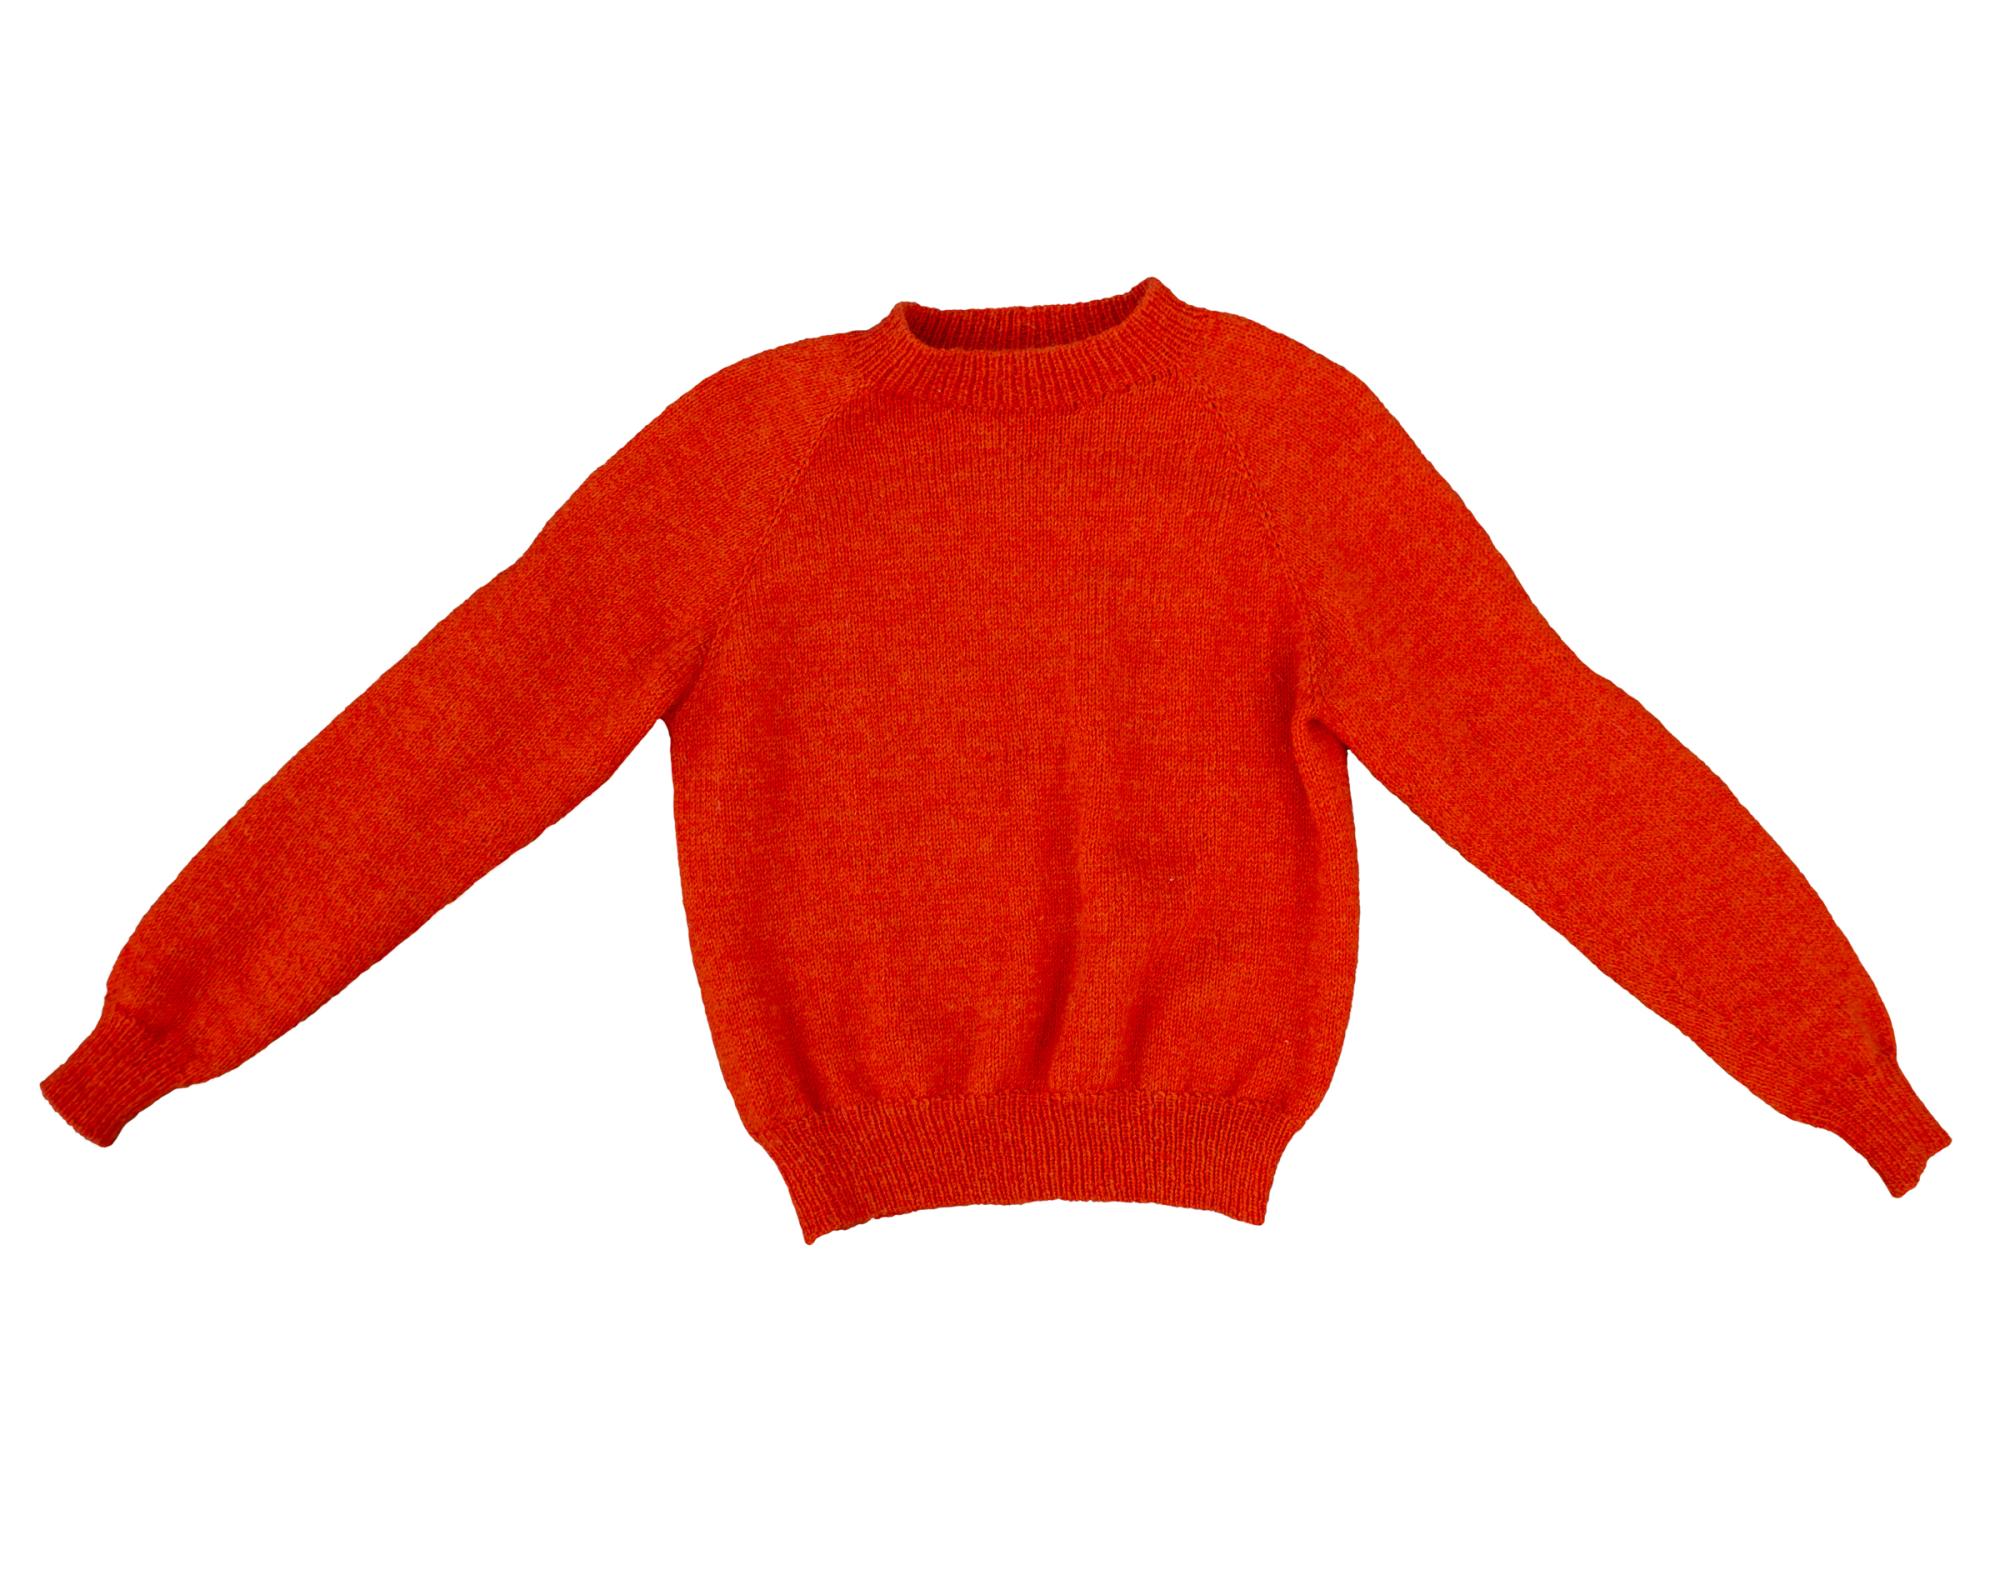 Tamsin Sloots - Through Rows and In Stitches: a sweater as (an)archive ...